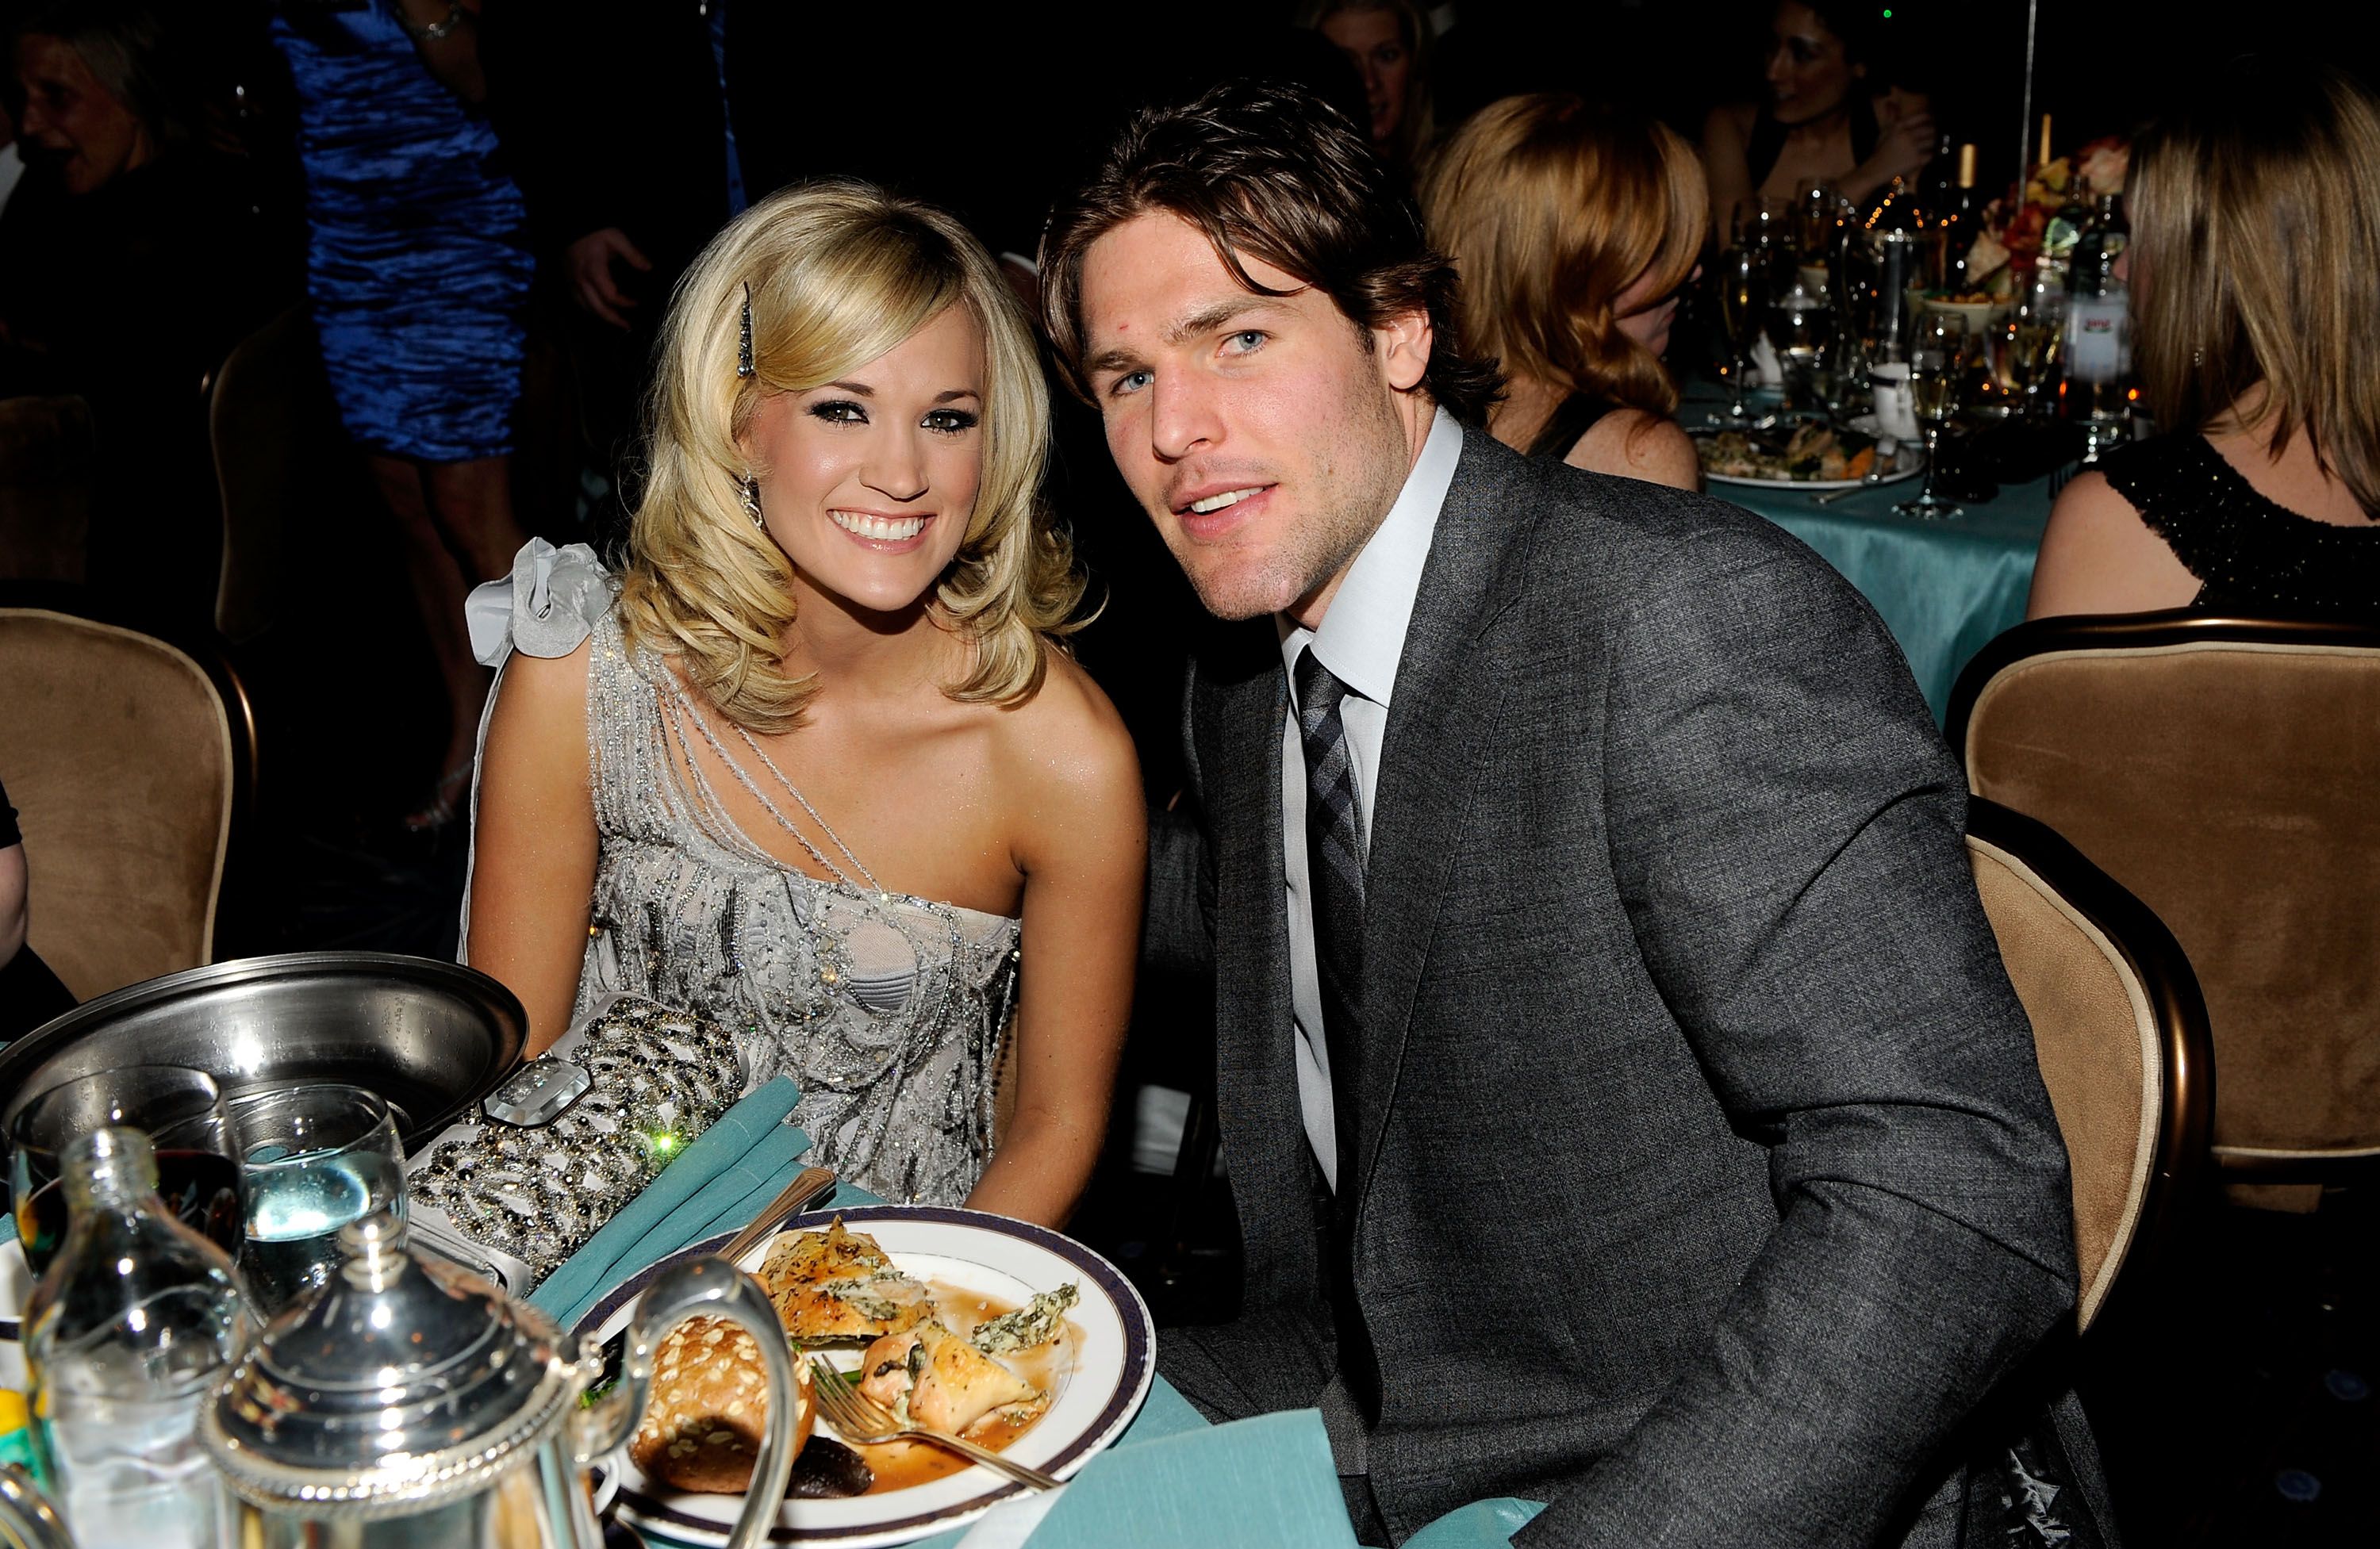 Carrie Underwood and Mike Fisher's Complete Relationship Timeline